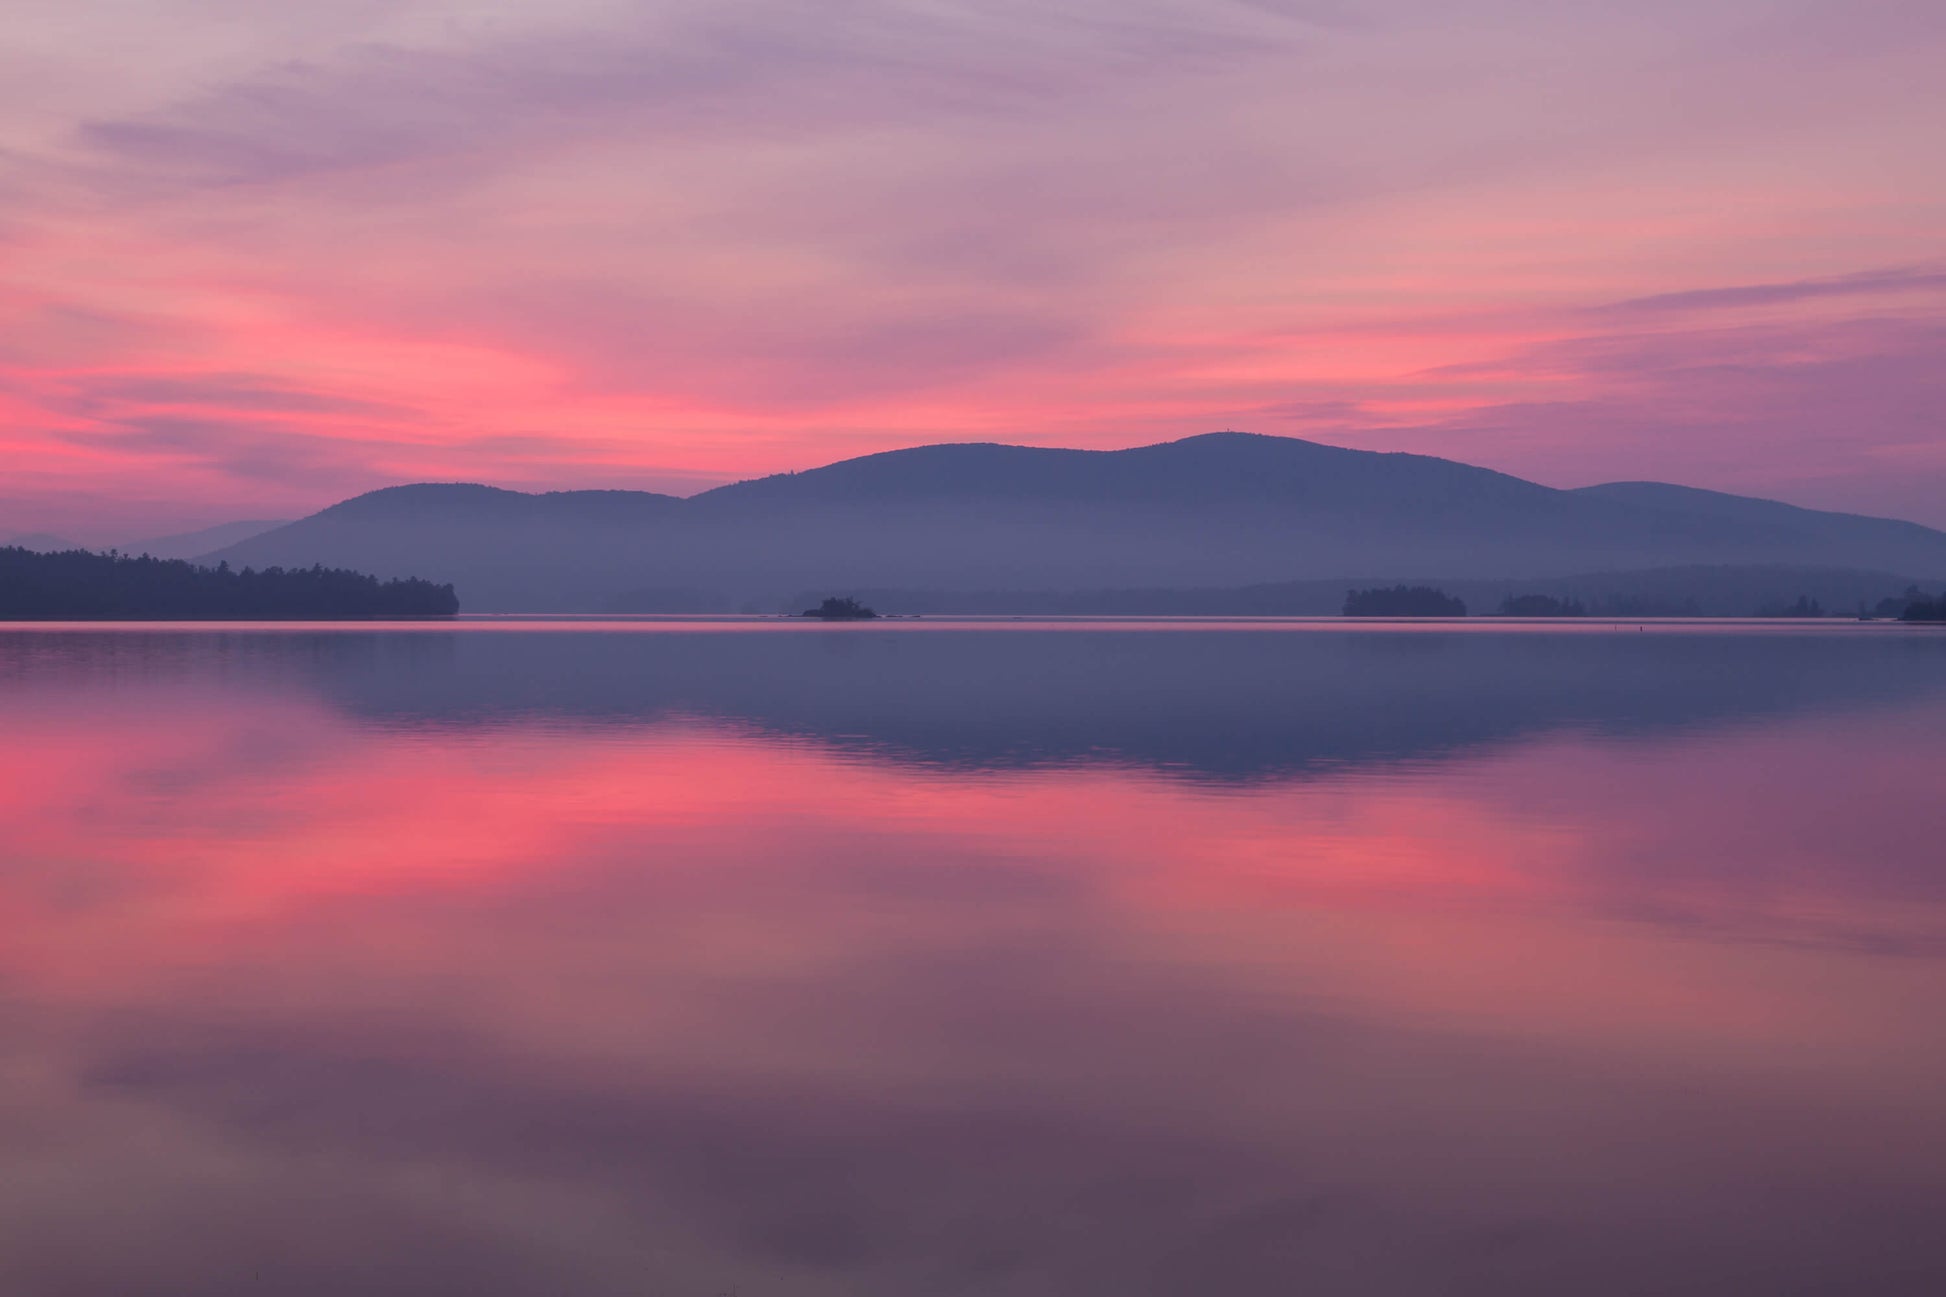 break of dawn over the mountains on Squam Lake